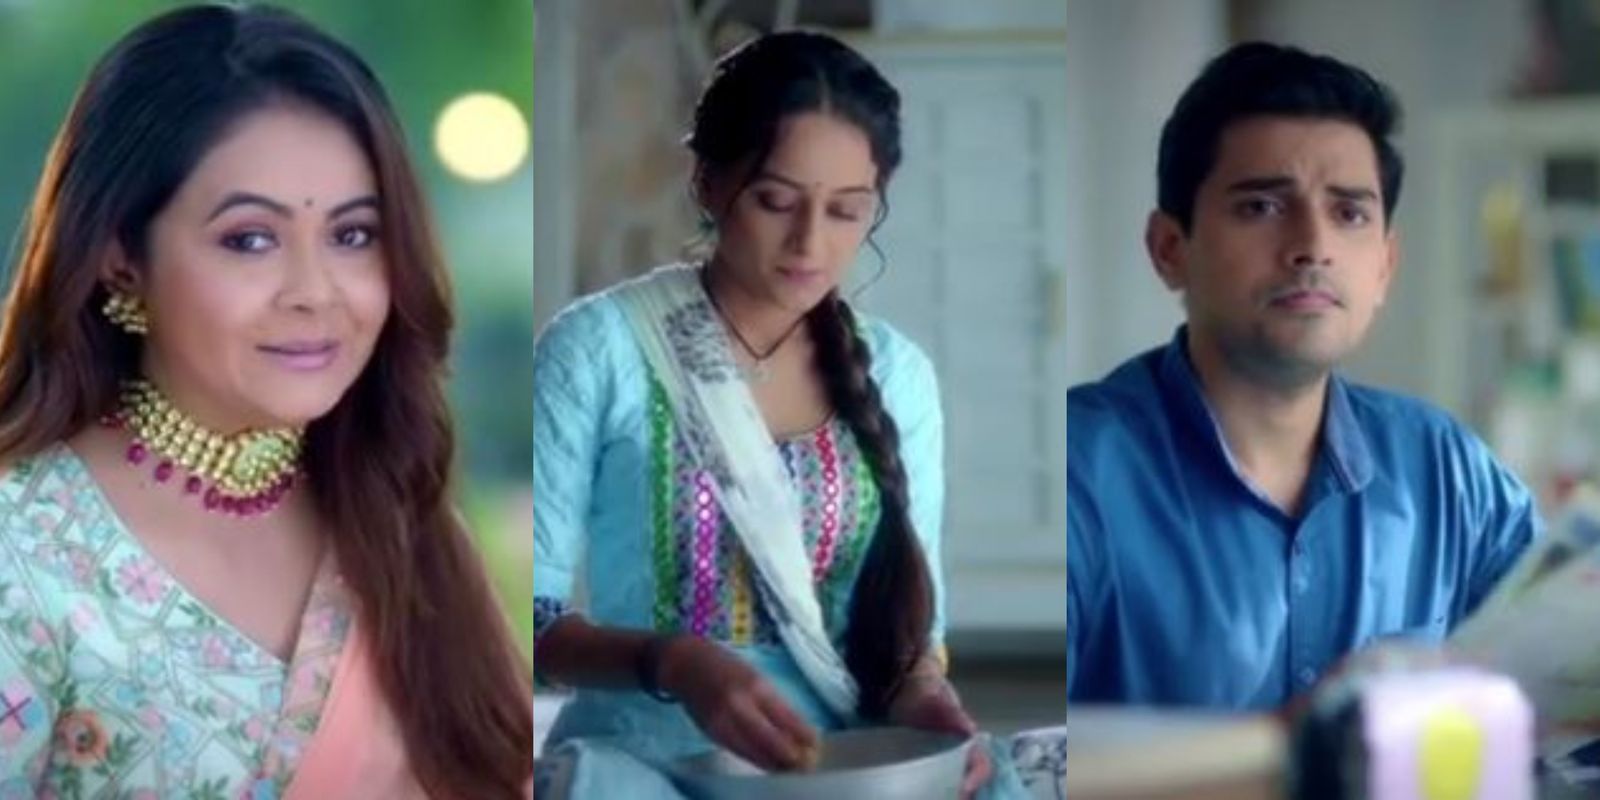 Saath Nibhana Saathiya 2 Promo: Devoleena Bhattacharjee Finally Introduces Gehna, Anand And What Could Be Their Love Story